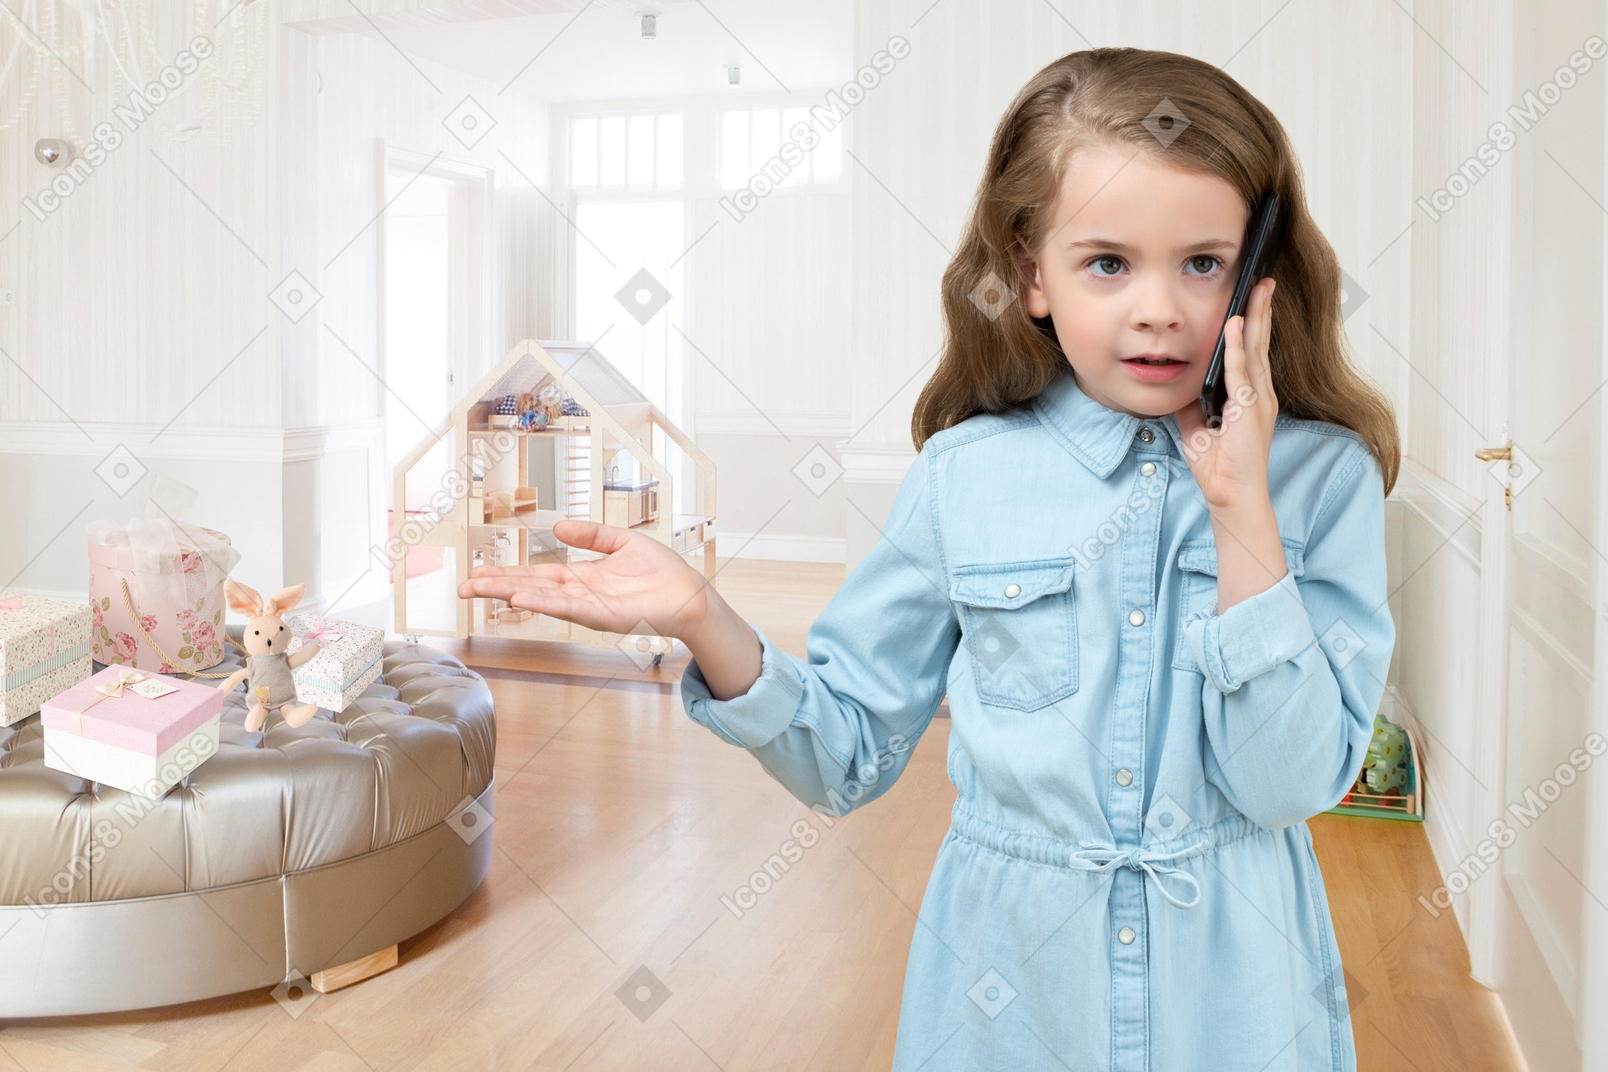 A little girl holding a cell phone to her ear